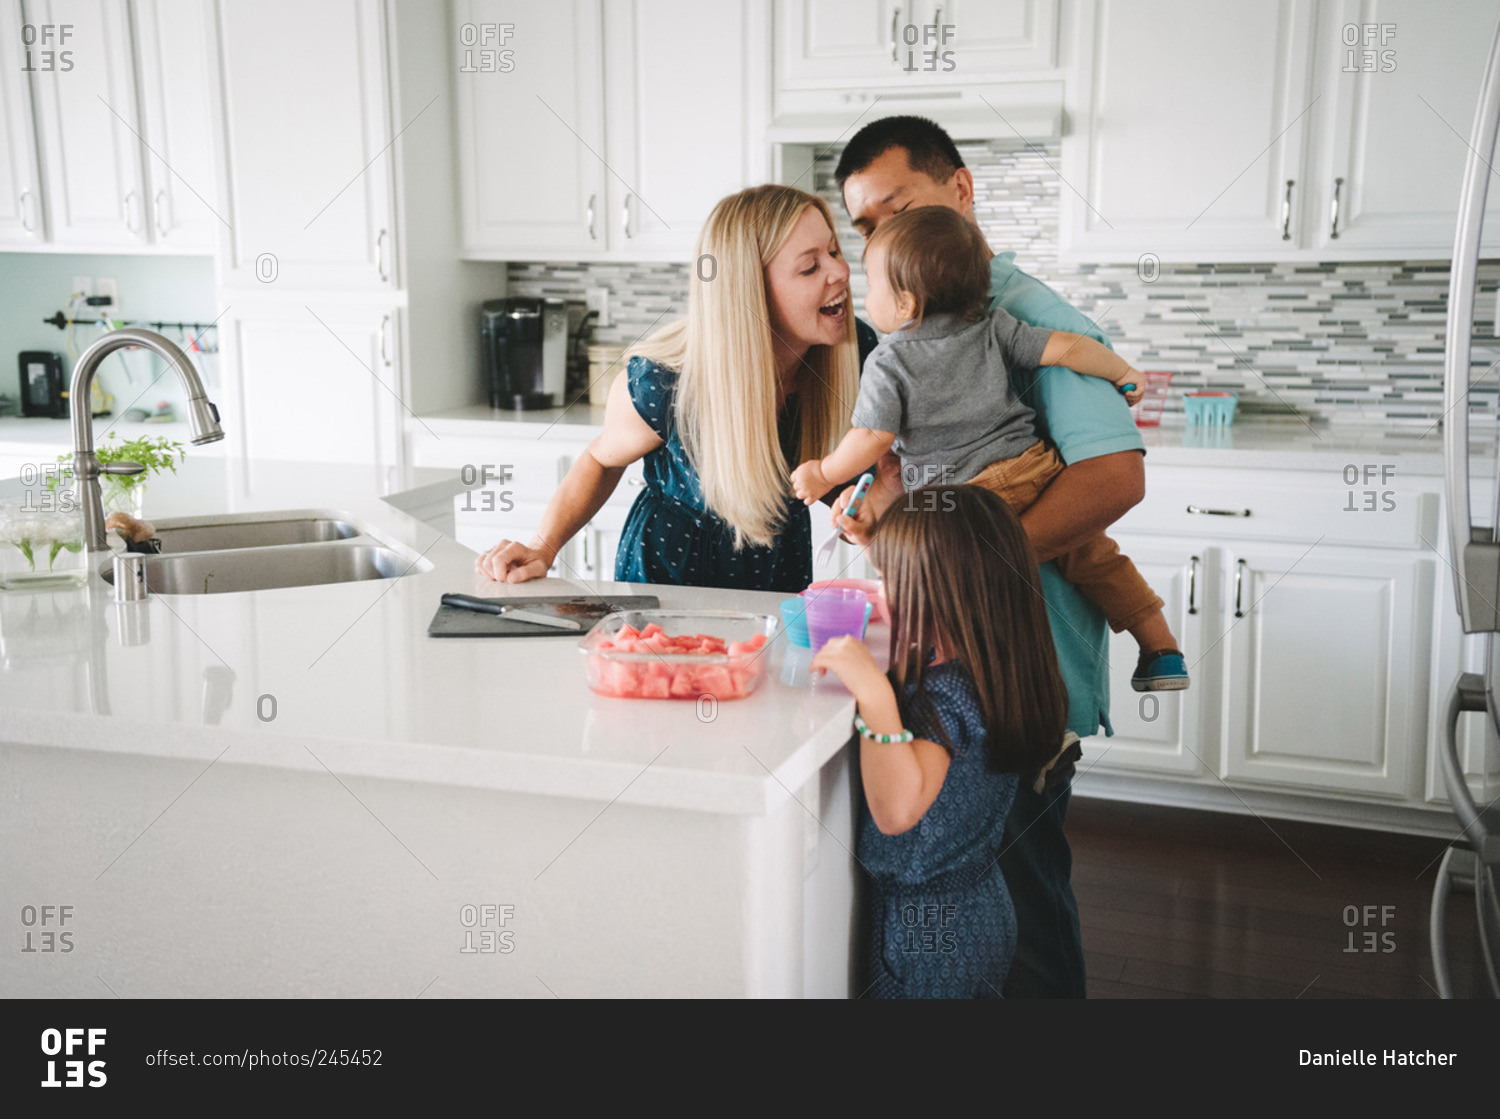 A family gathers in the kitchen for a watermelon snack